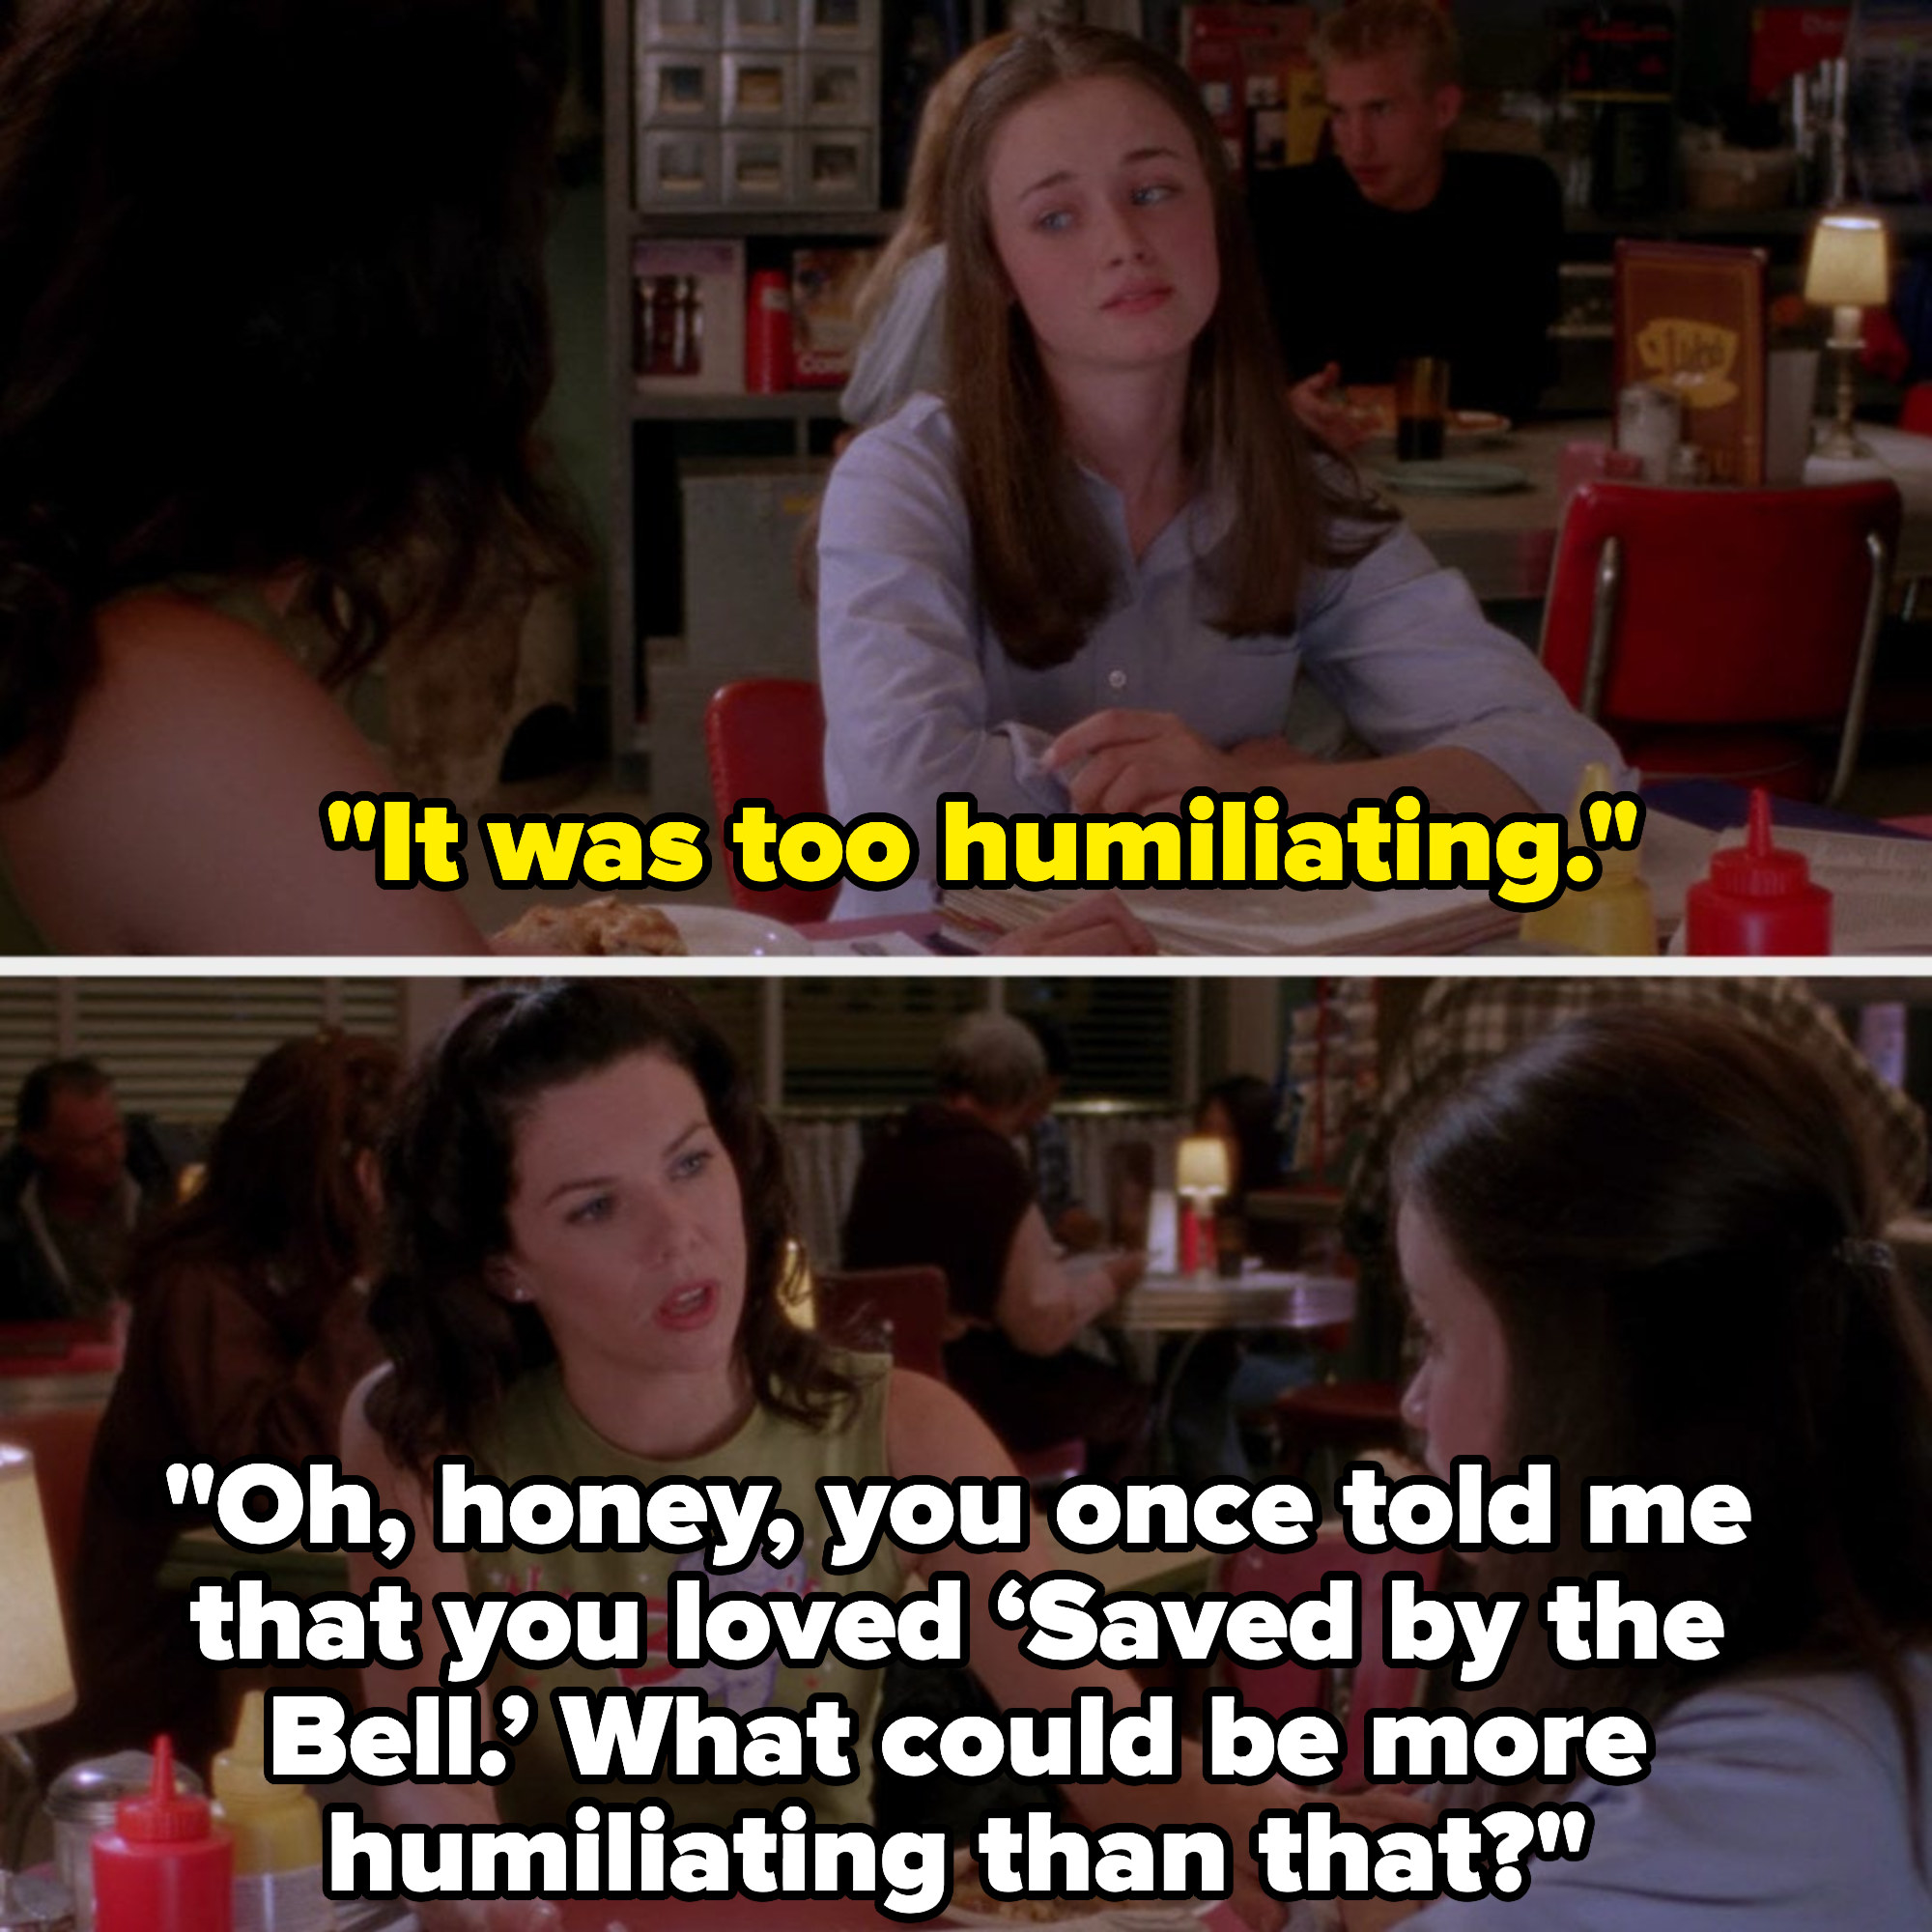 Rory says it was too humiliating, and Lorelai tells her that Rory once said she loved &quot;Saved by the Bell,&quot; and asks what could be more humiliating than that